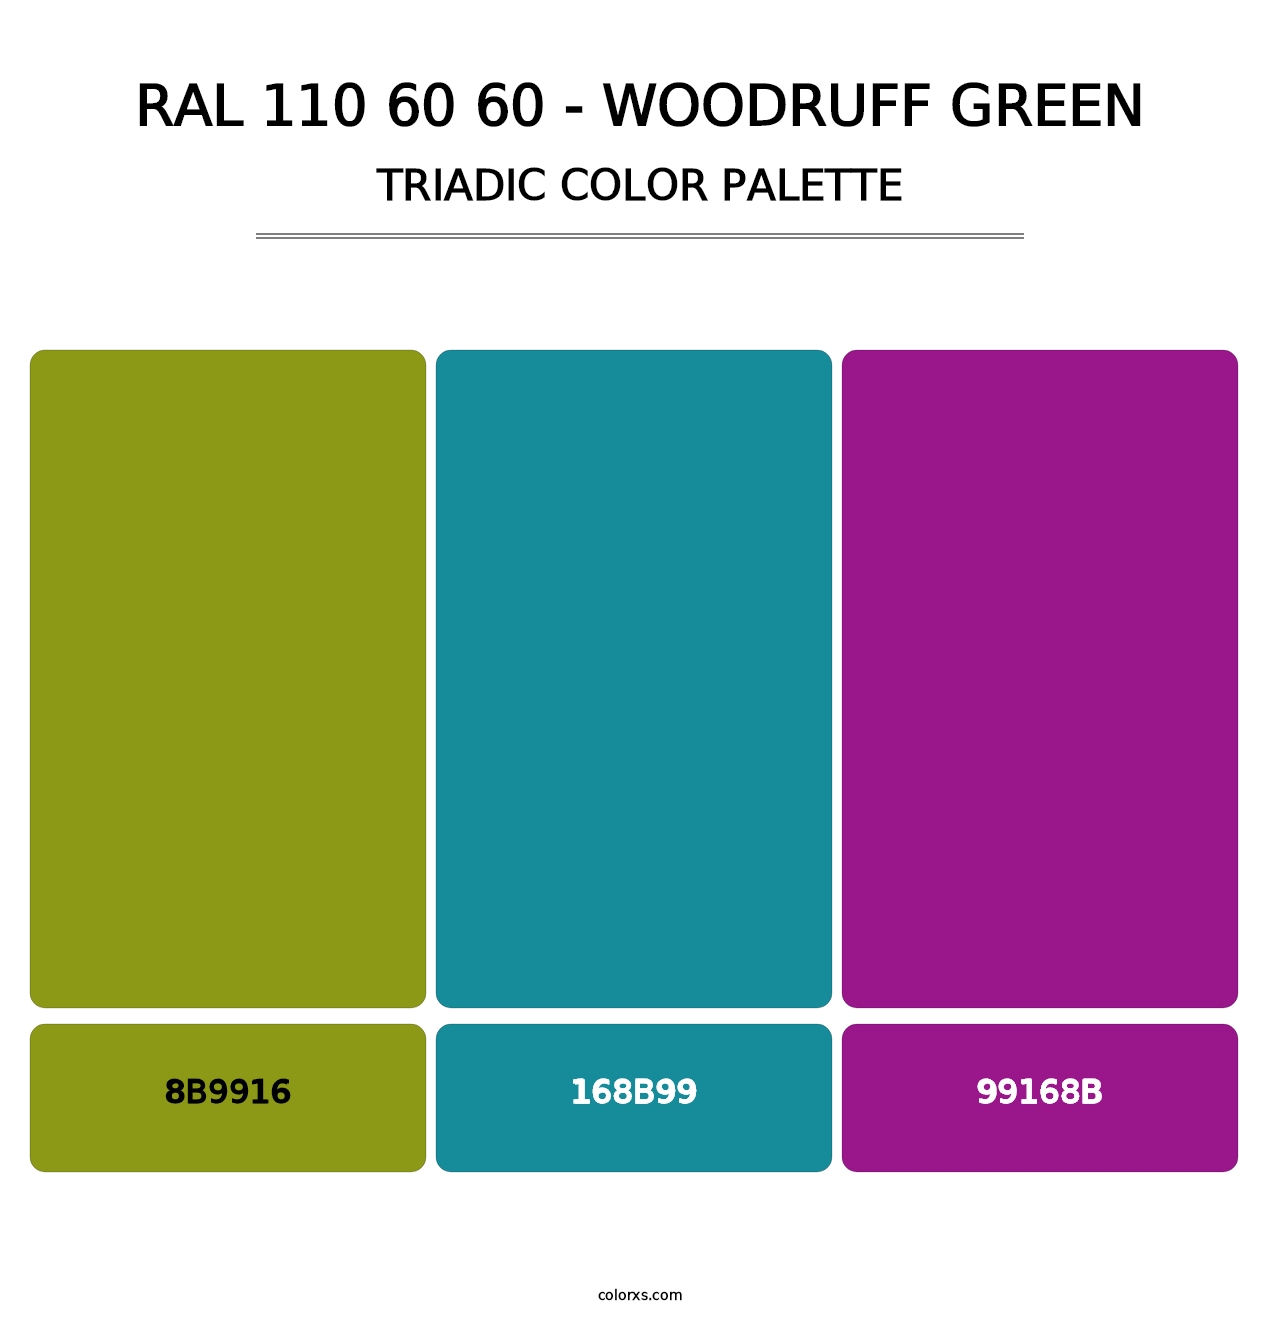 RAL 110 60 60 - Woodruff Green - Triadic Color Palette